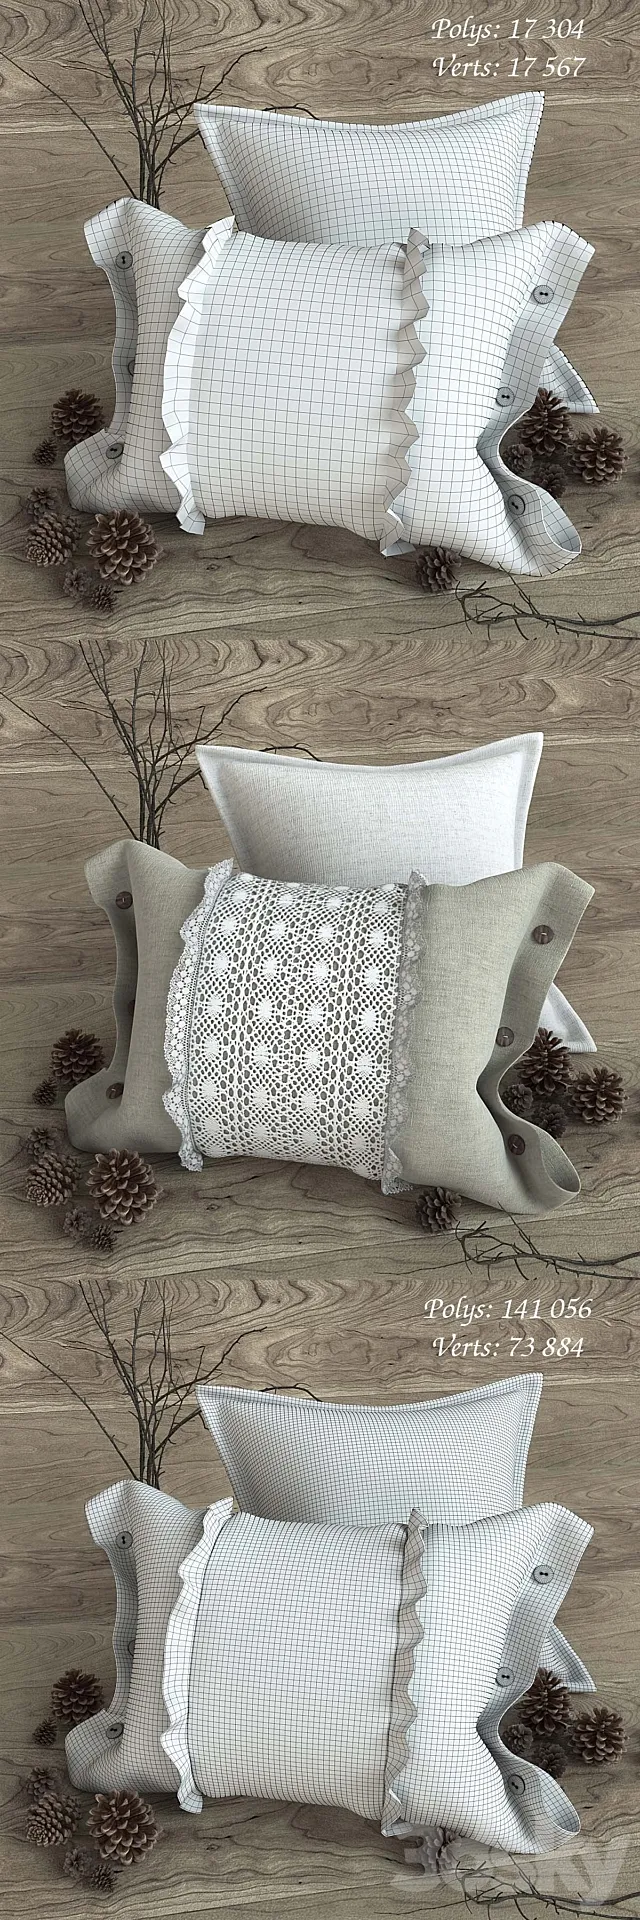 Pillows in country style 3DSMax File